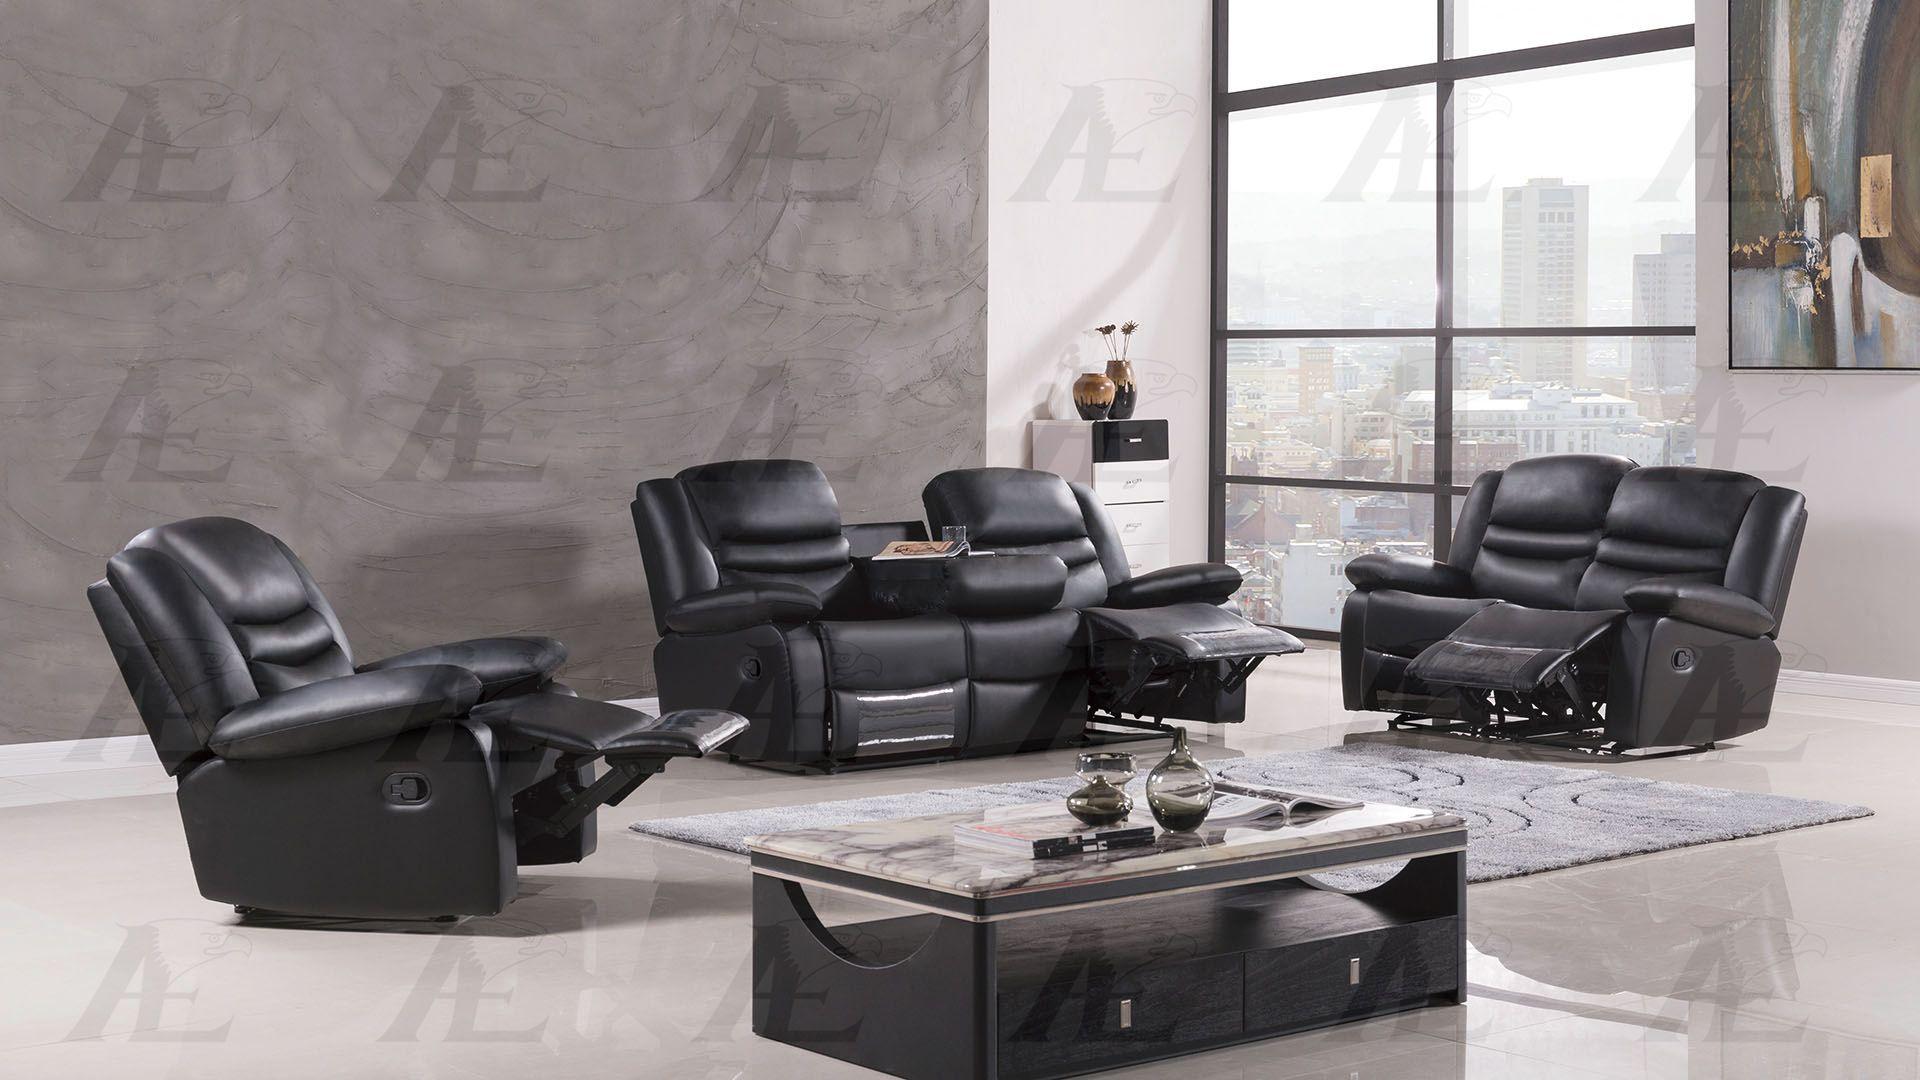 

    
American Eagle Furniture AE-D823-BK Black Recliner Sofa  Loveseat and Chair Set Bonded Leather 3Pcs Modern
